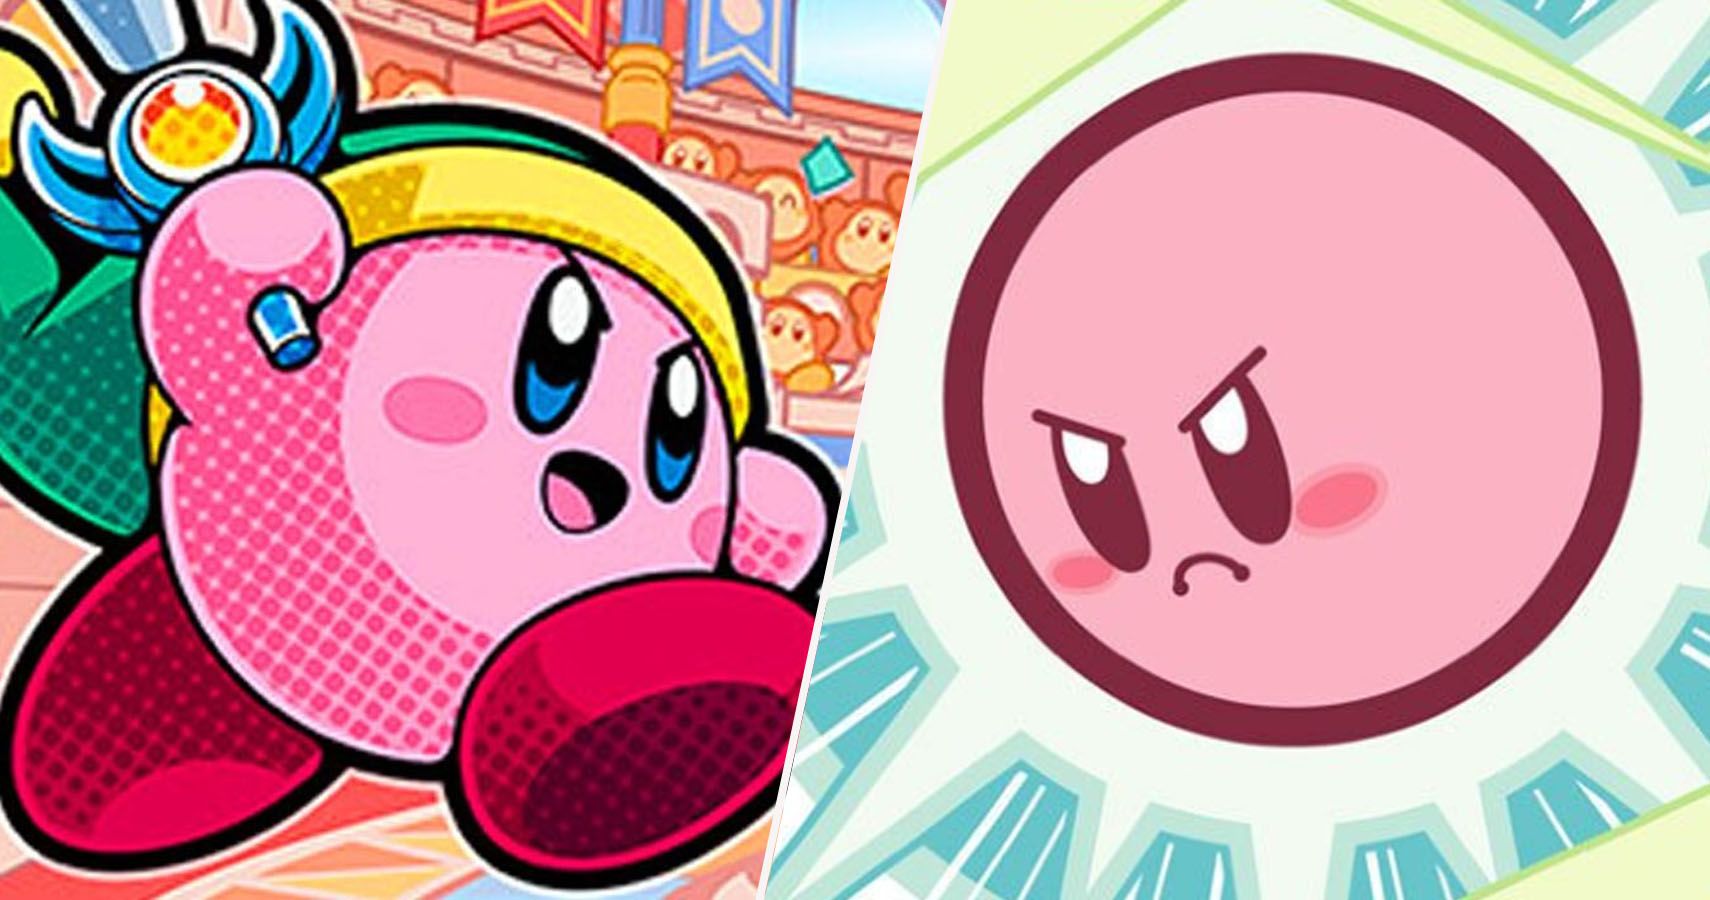 metacritic on X: Every Kirby Videogame, Ranked